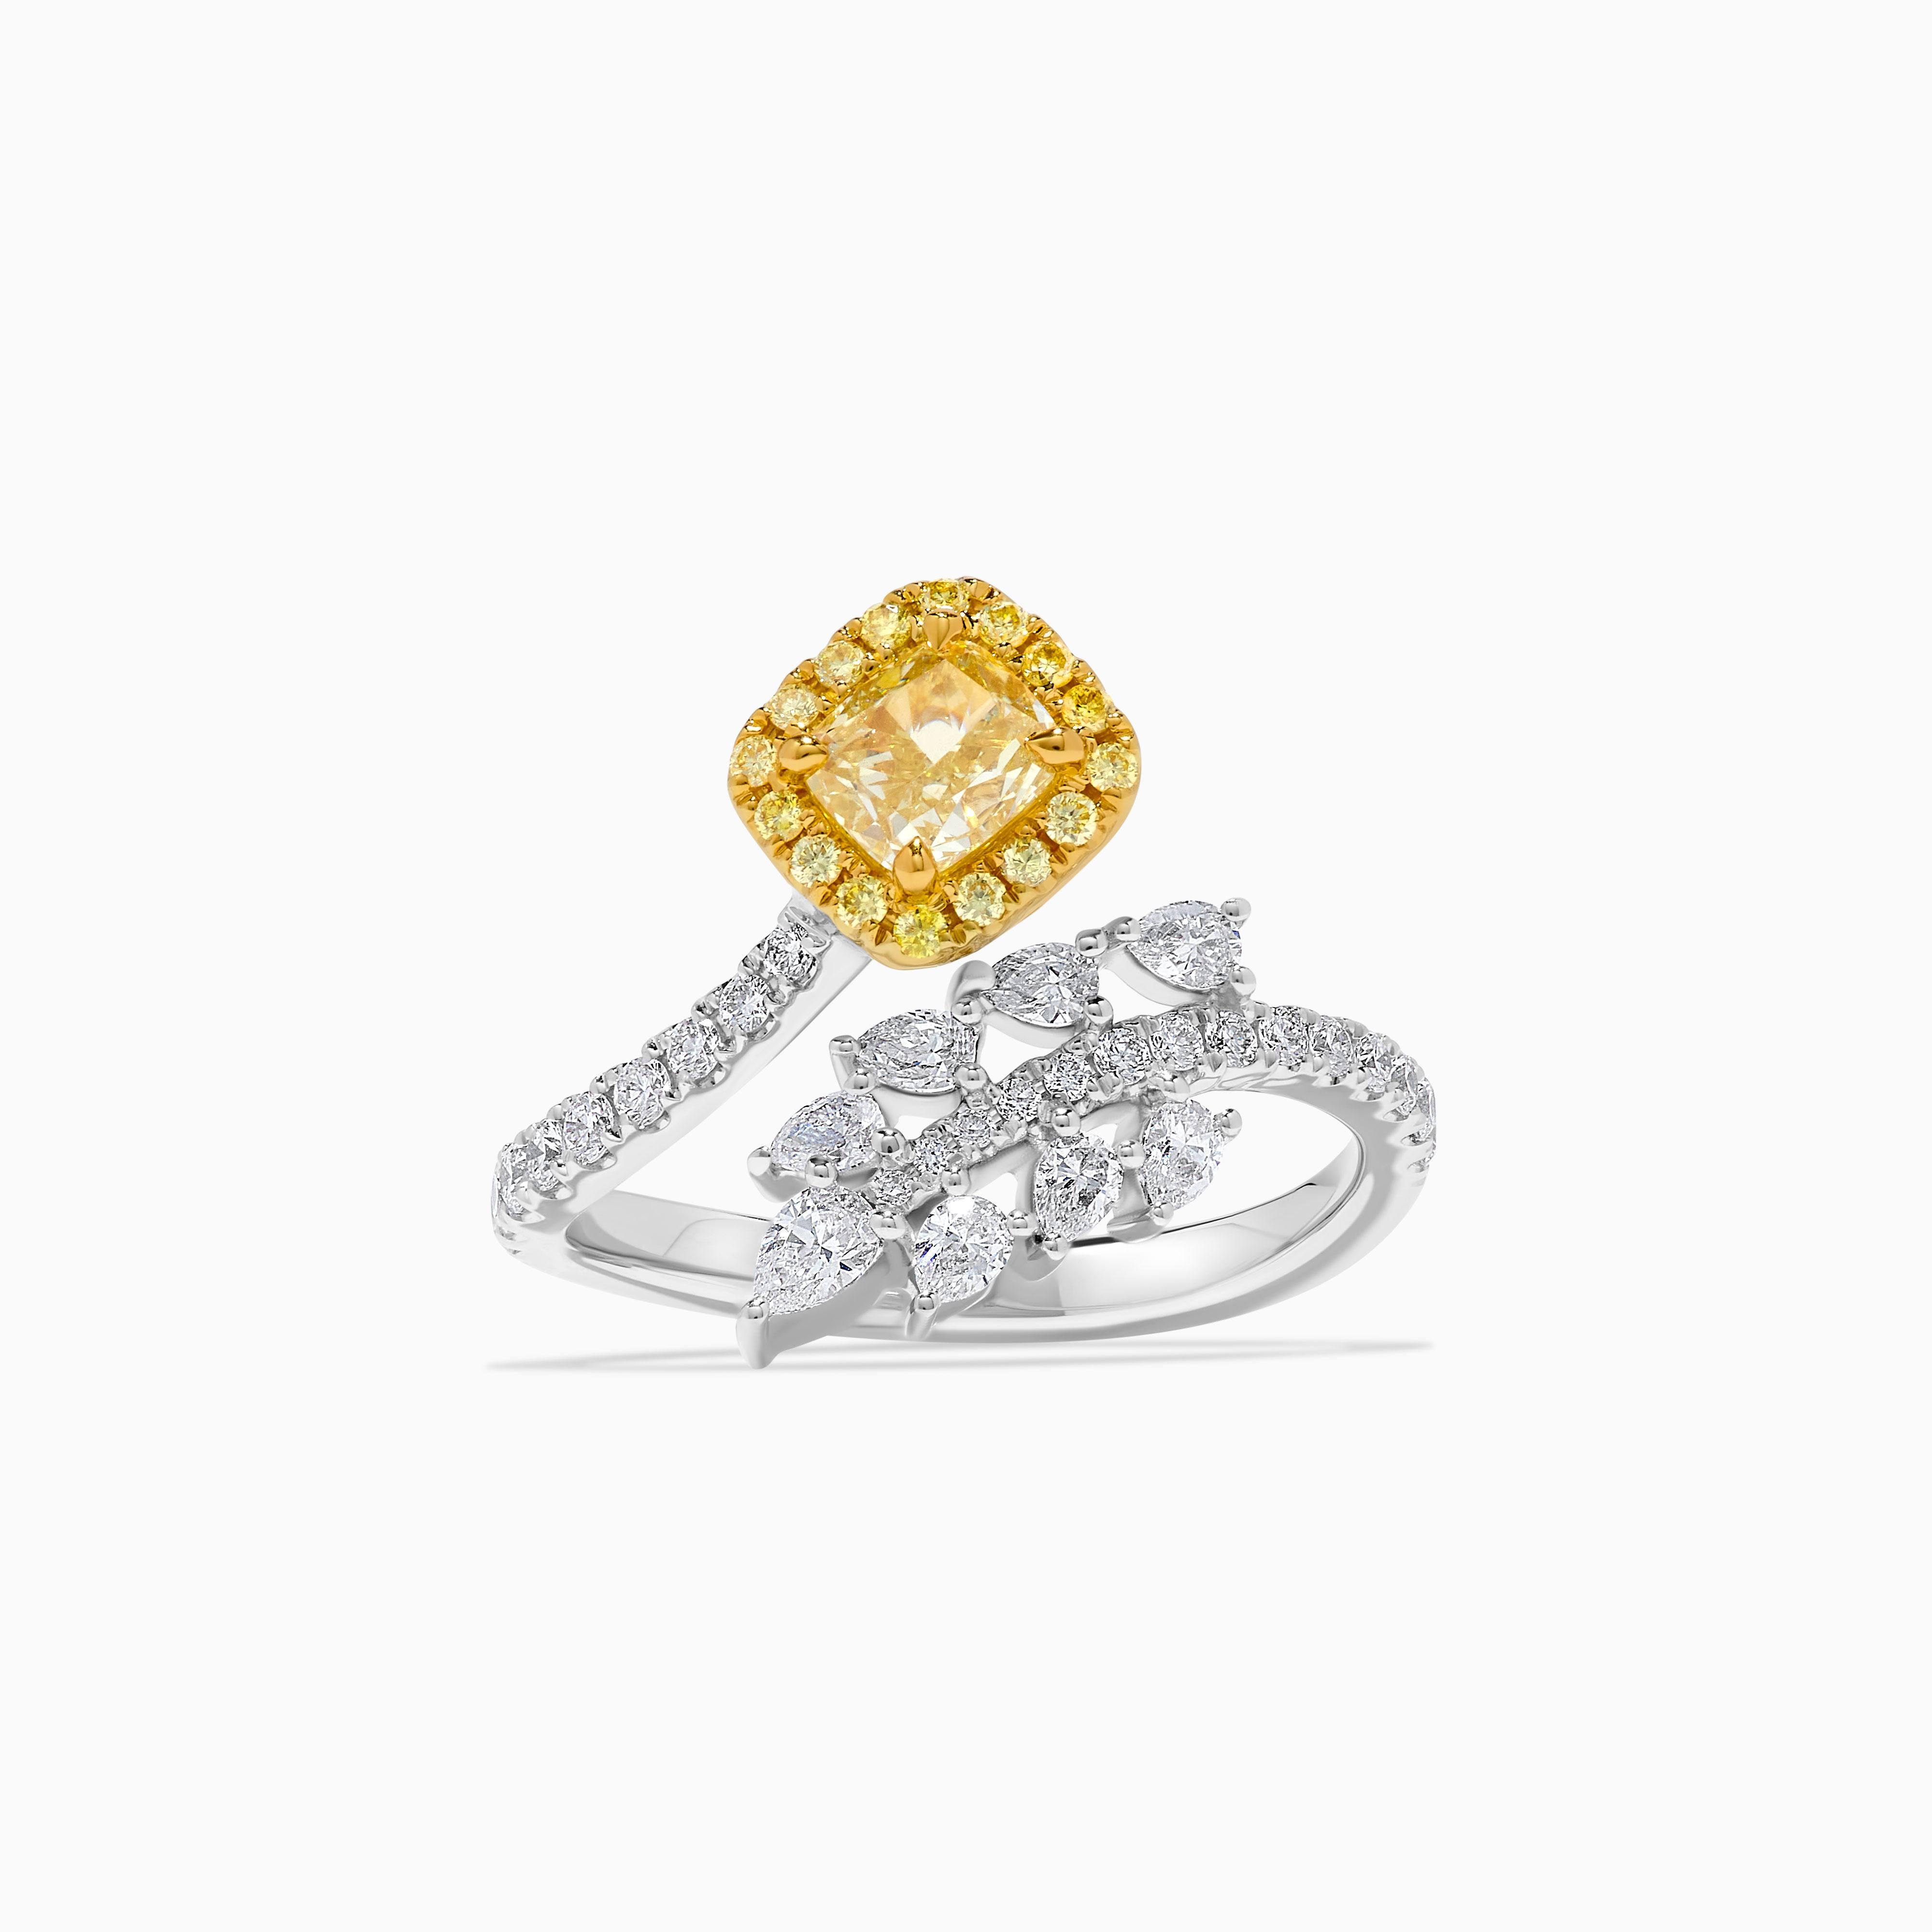 Cushion Cut GIA Certified Natural Yellow Cushion Diamond 1.69 Carat TW Gold Cocktail Ring For Sale